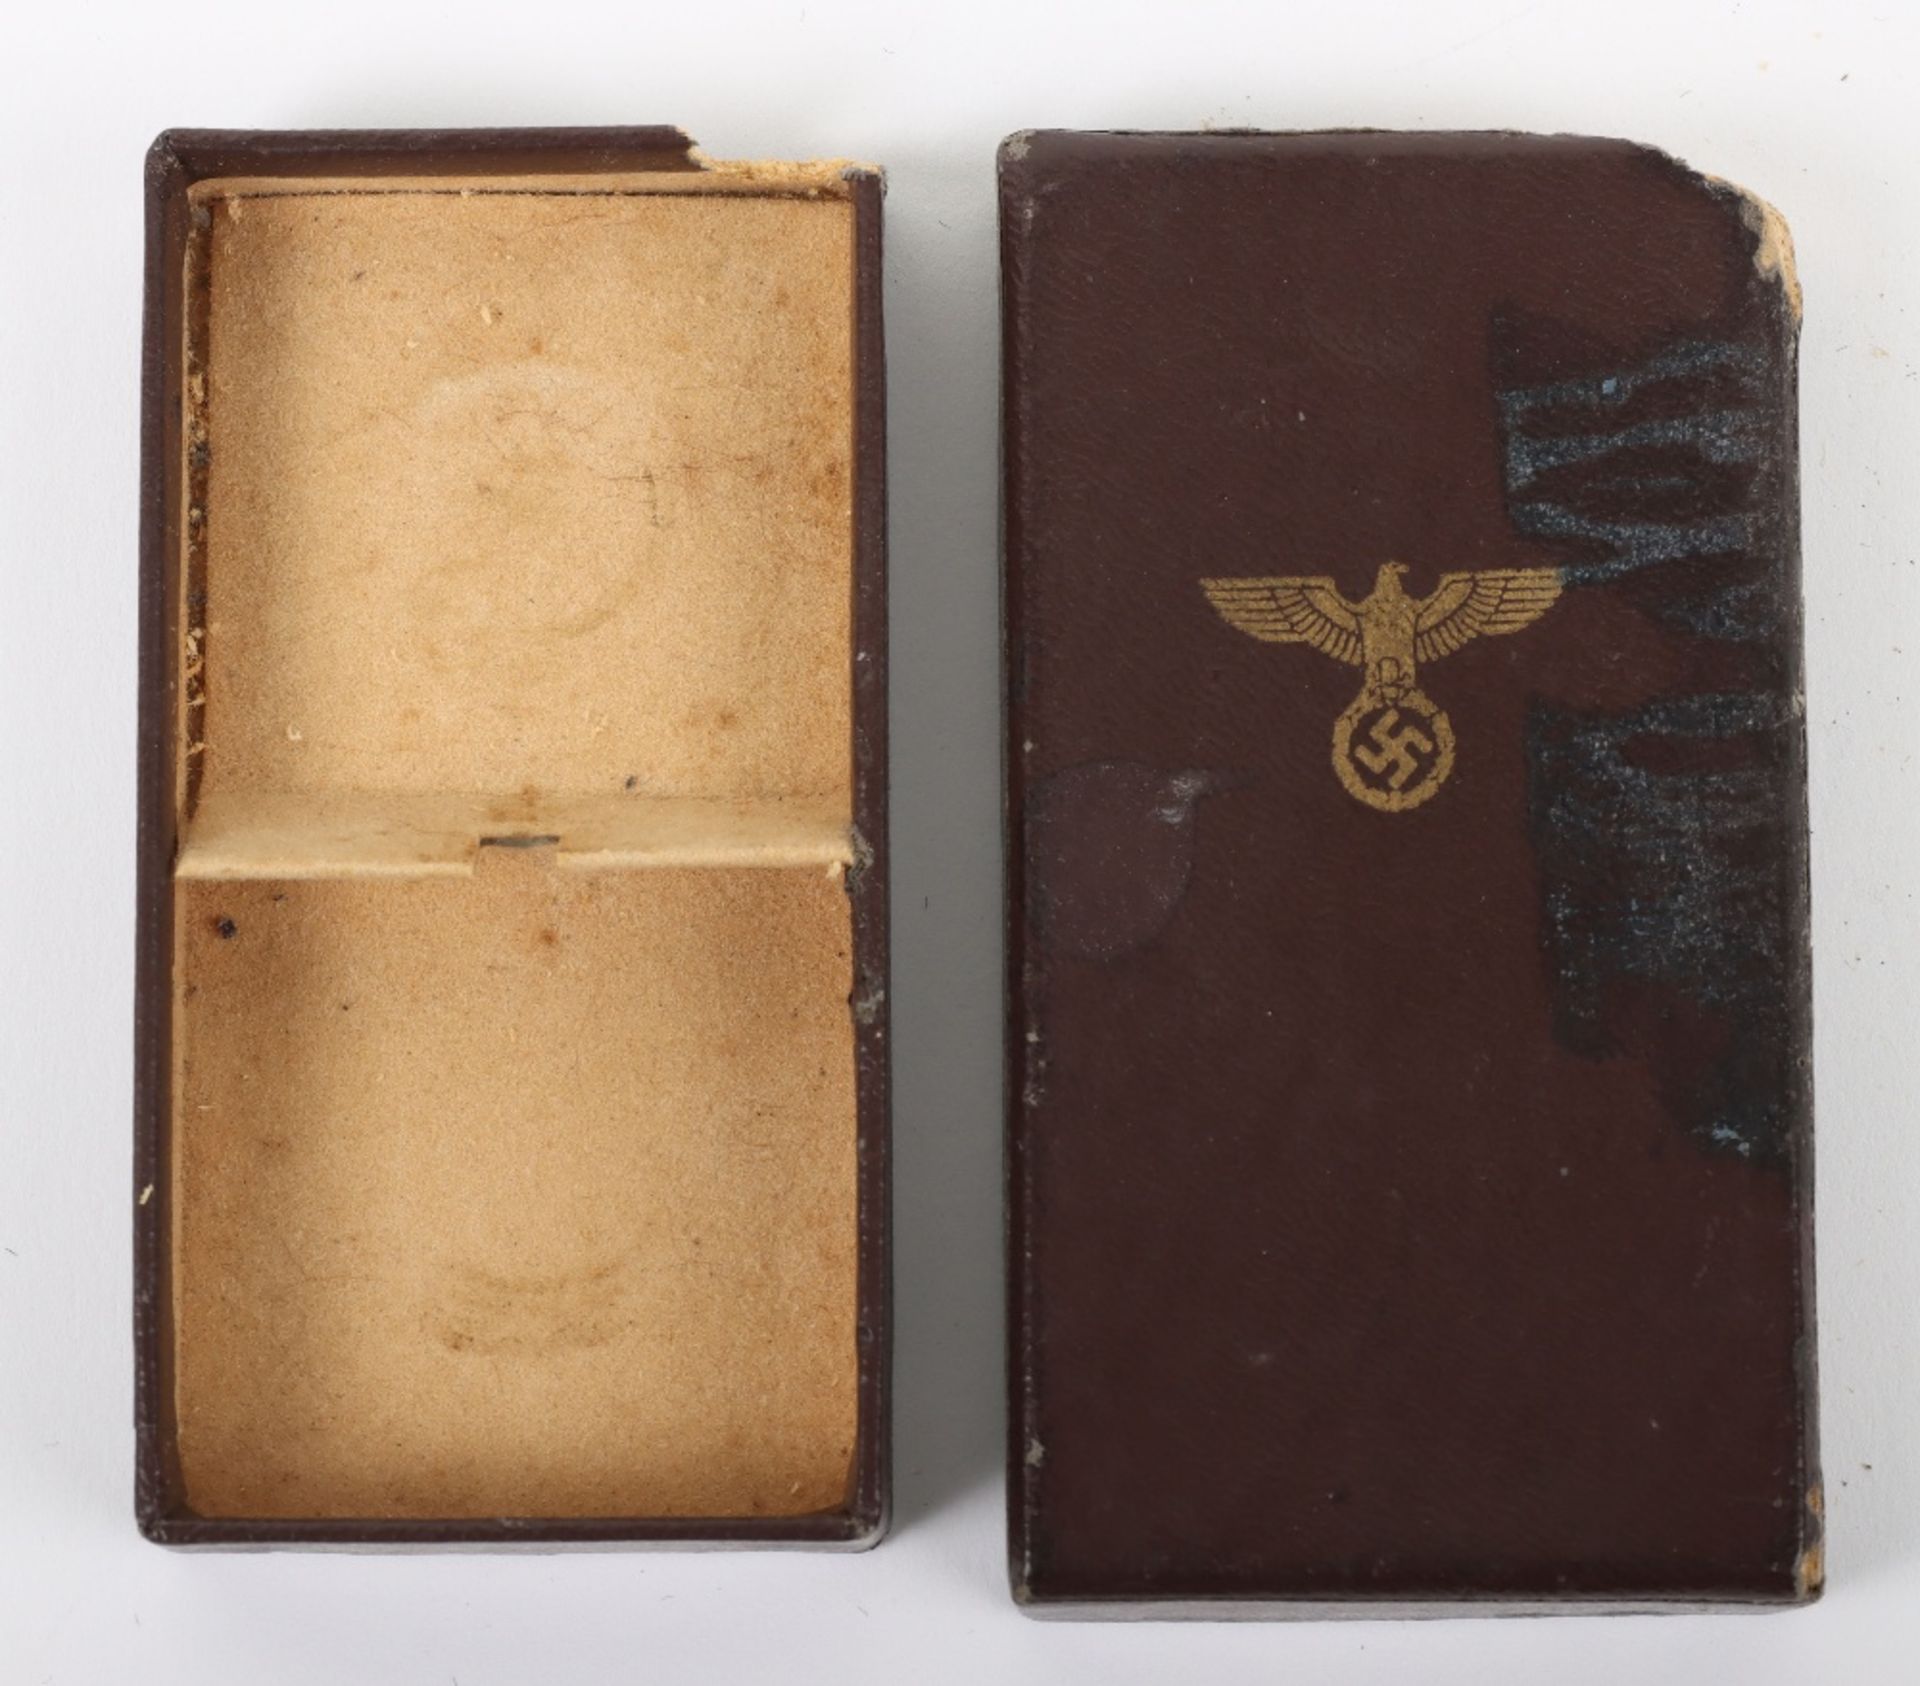 Third Reich NSDAP 10 Year Service Medal Card Box of Issue - Image 3 of 5